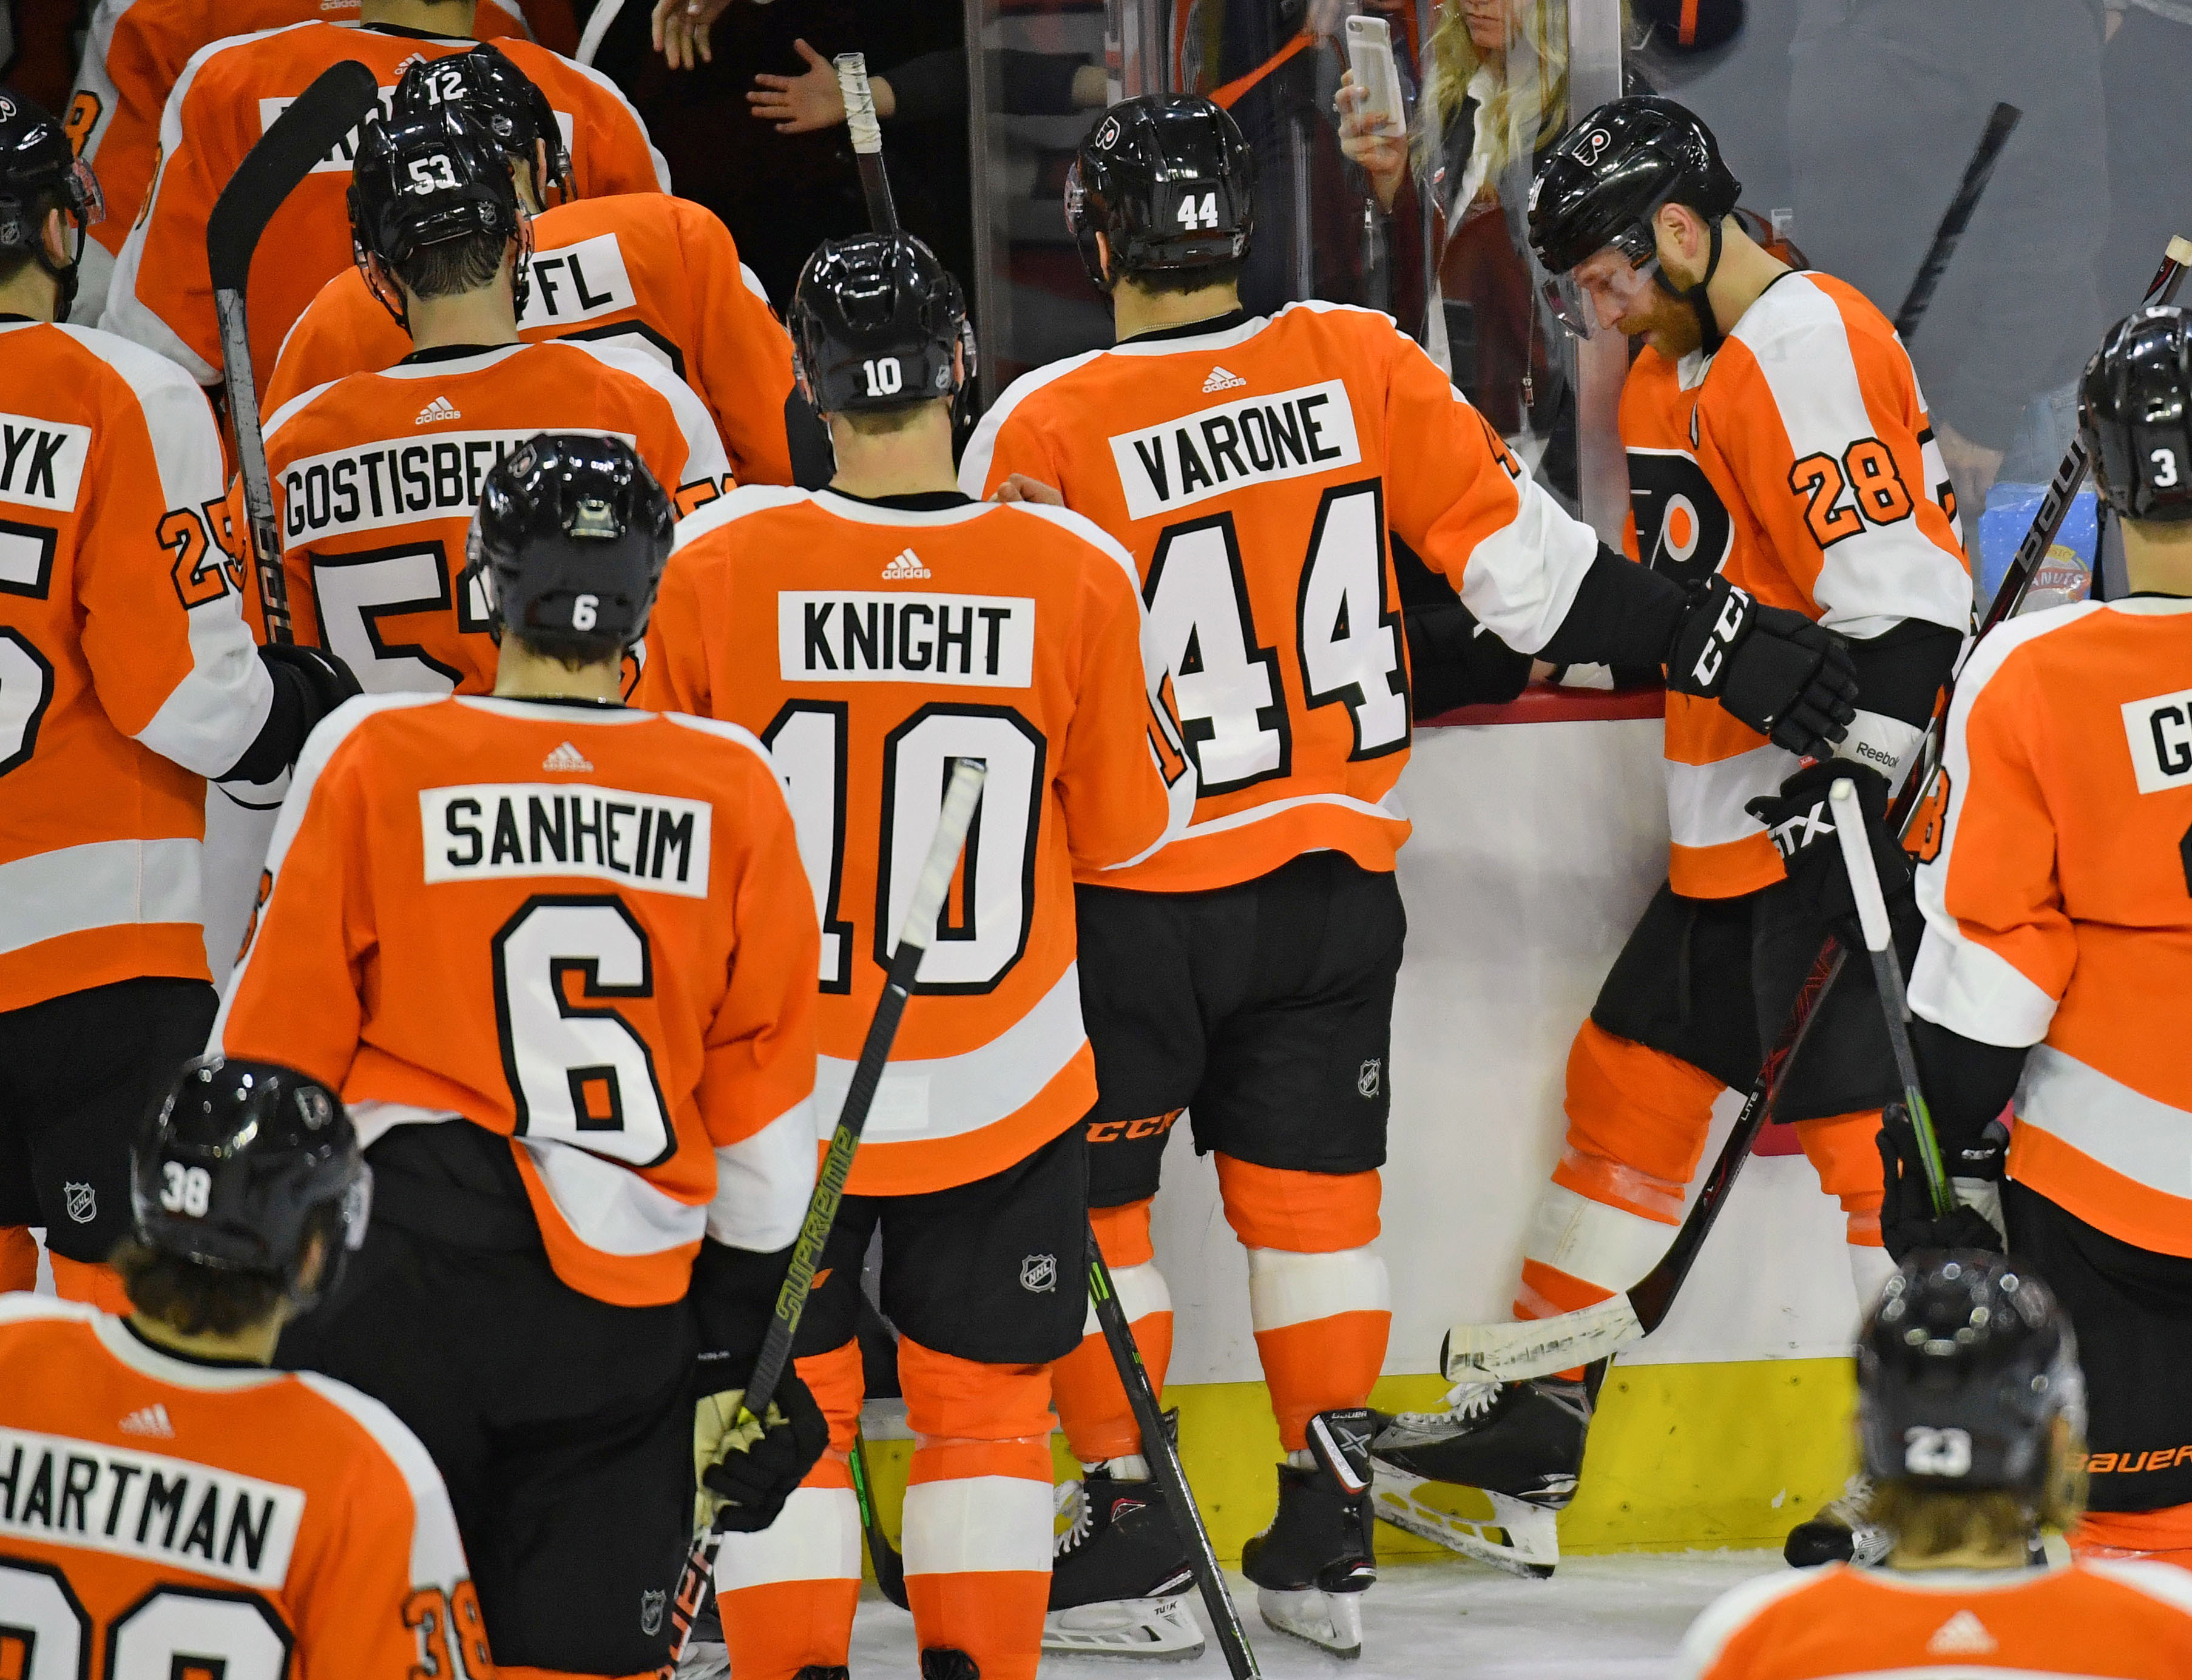 “We’re Not Good Enough Right Now” – GM Chuck Fletcher Wraps Up Flyers’ Disappointing Season